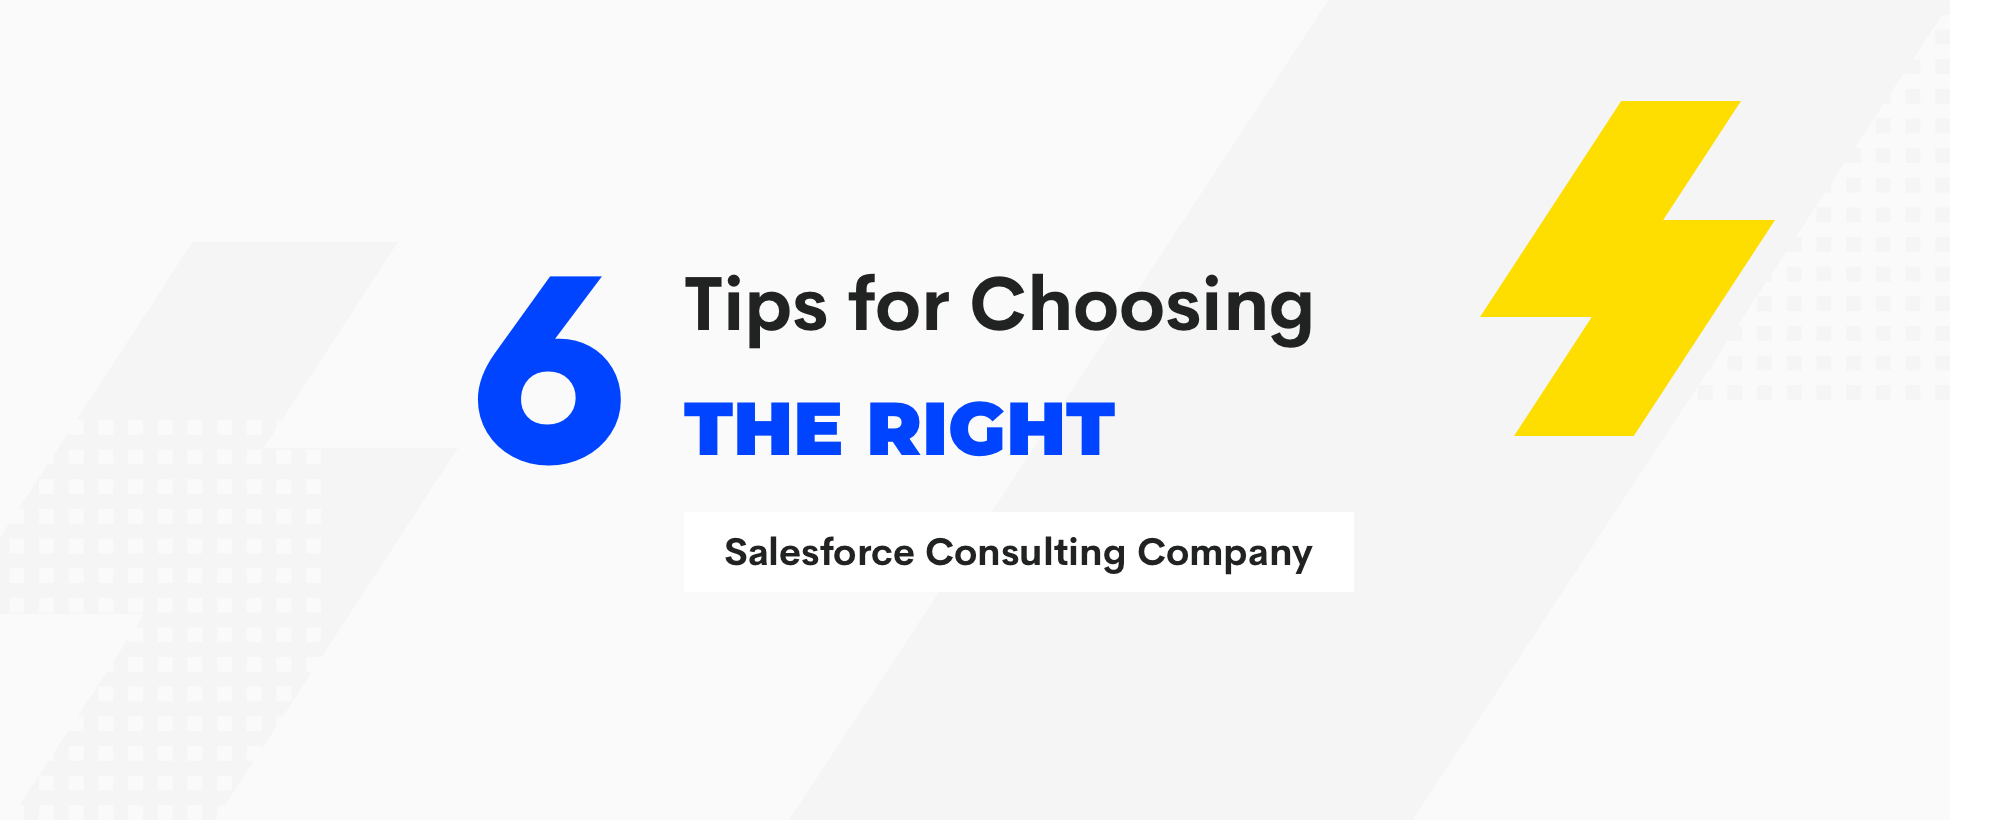 Looking For a Salesforce Consulting Partner? Check these tips